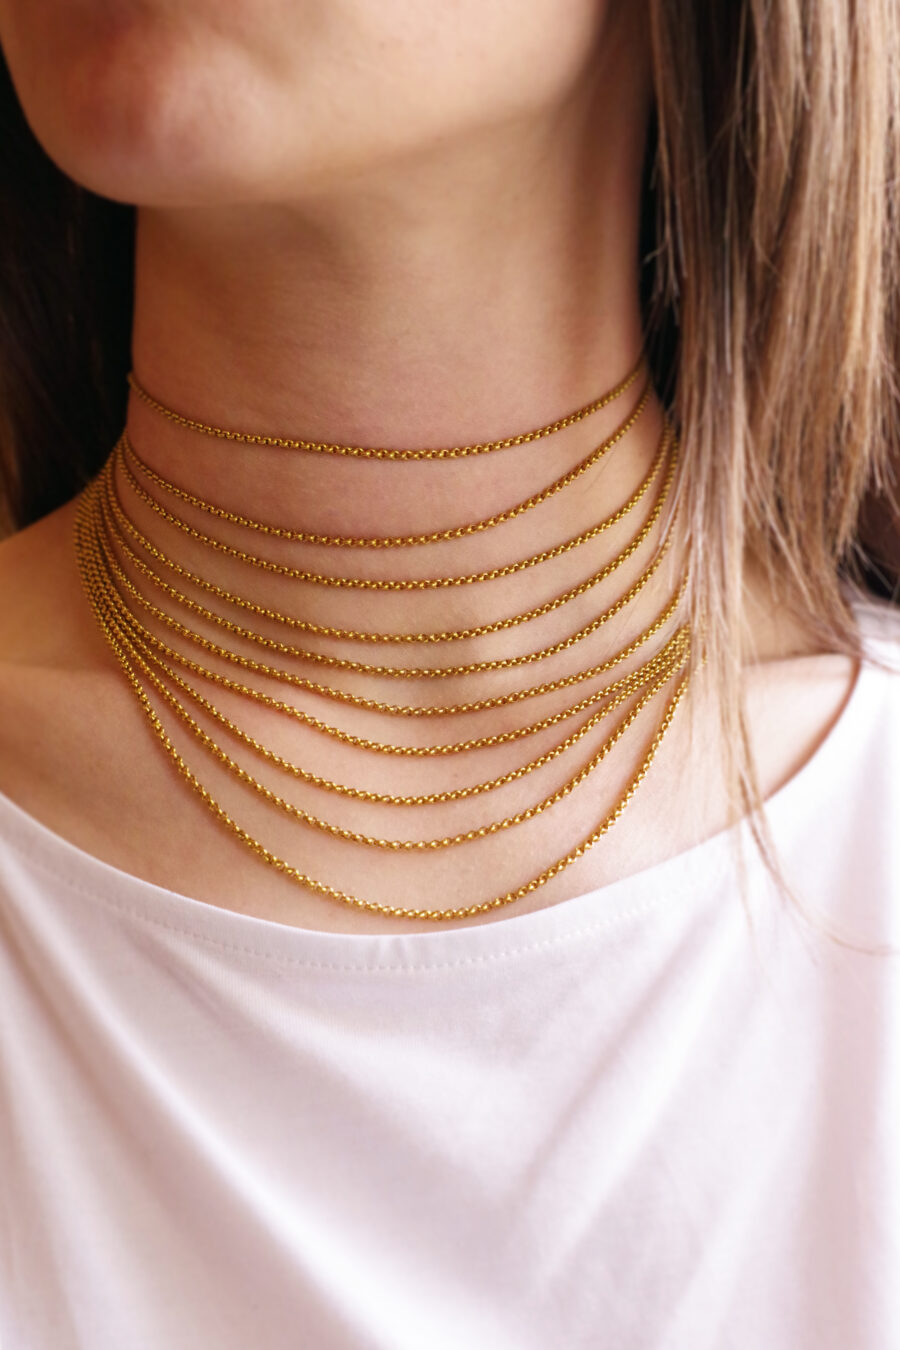 Georgian rows of gold necklace